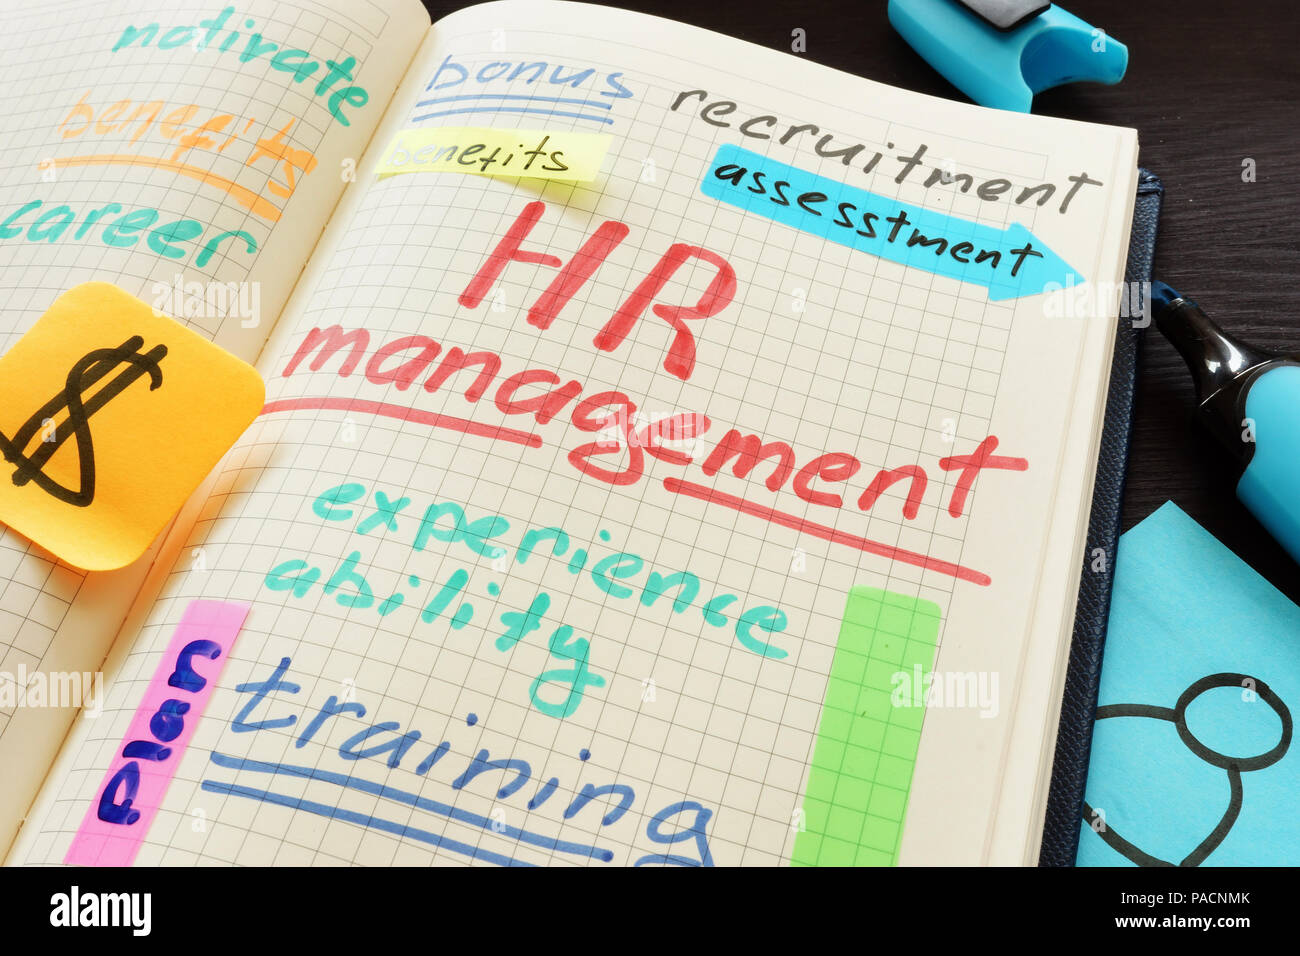 HR human resource management. Note and pen. Stock Photo